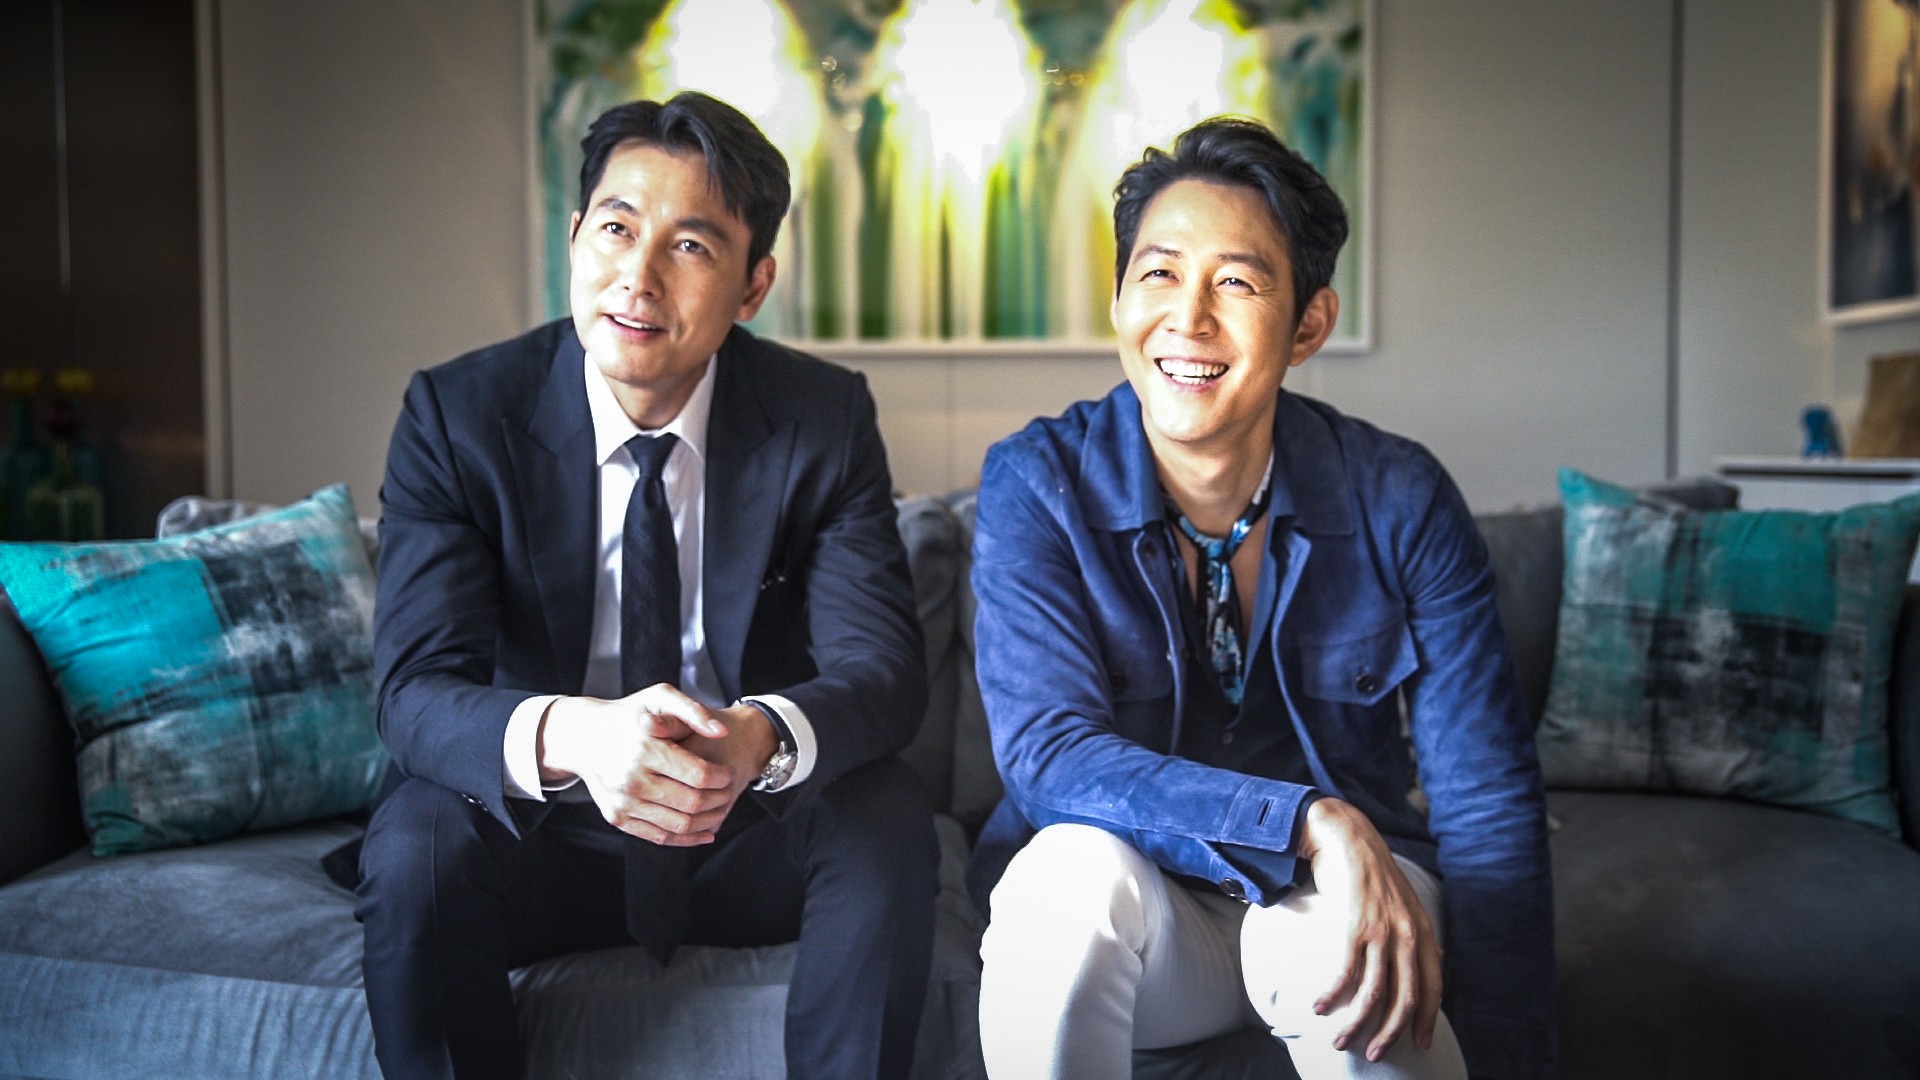 South Korean actors Jung Woo-sung and Lee Jung-jae on a visit to Hong Kong where they attended Art Basel.